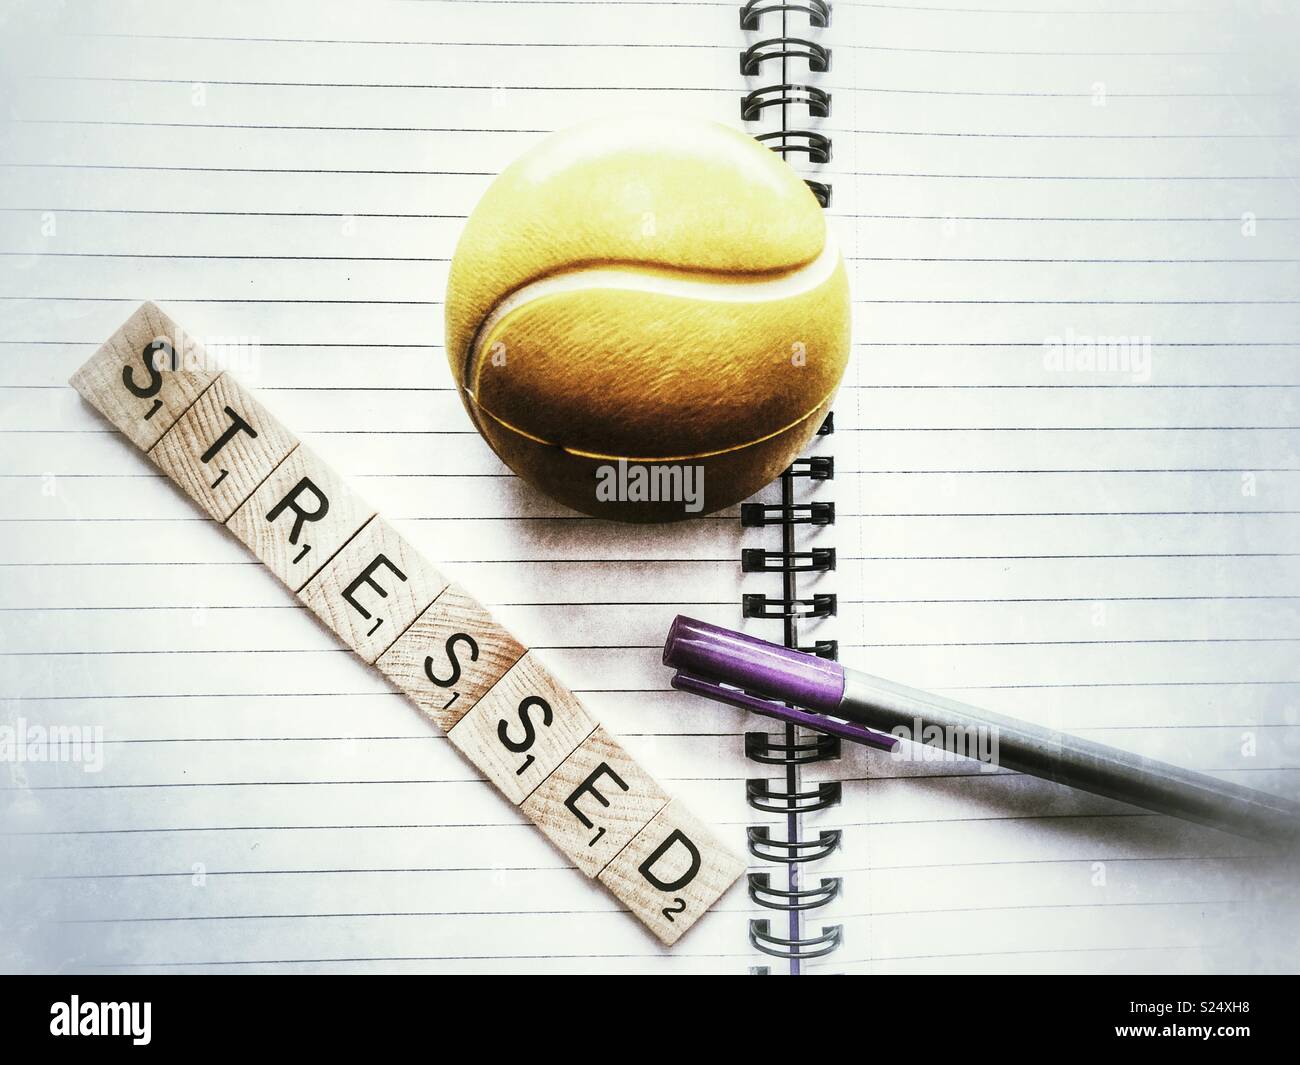 a stress ball, pen, and the word Stressed in wooden letters on an open, empty, spiral bound notebook Stock Photo